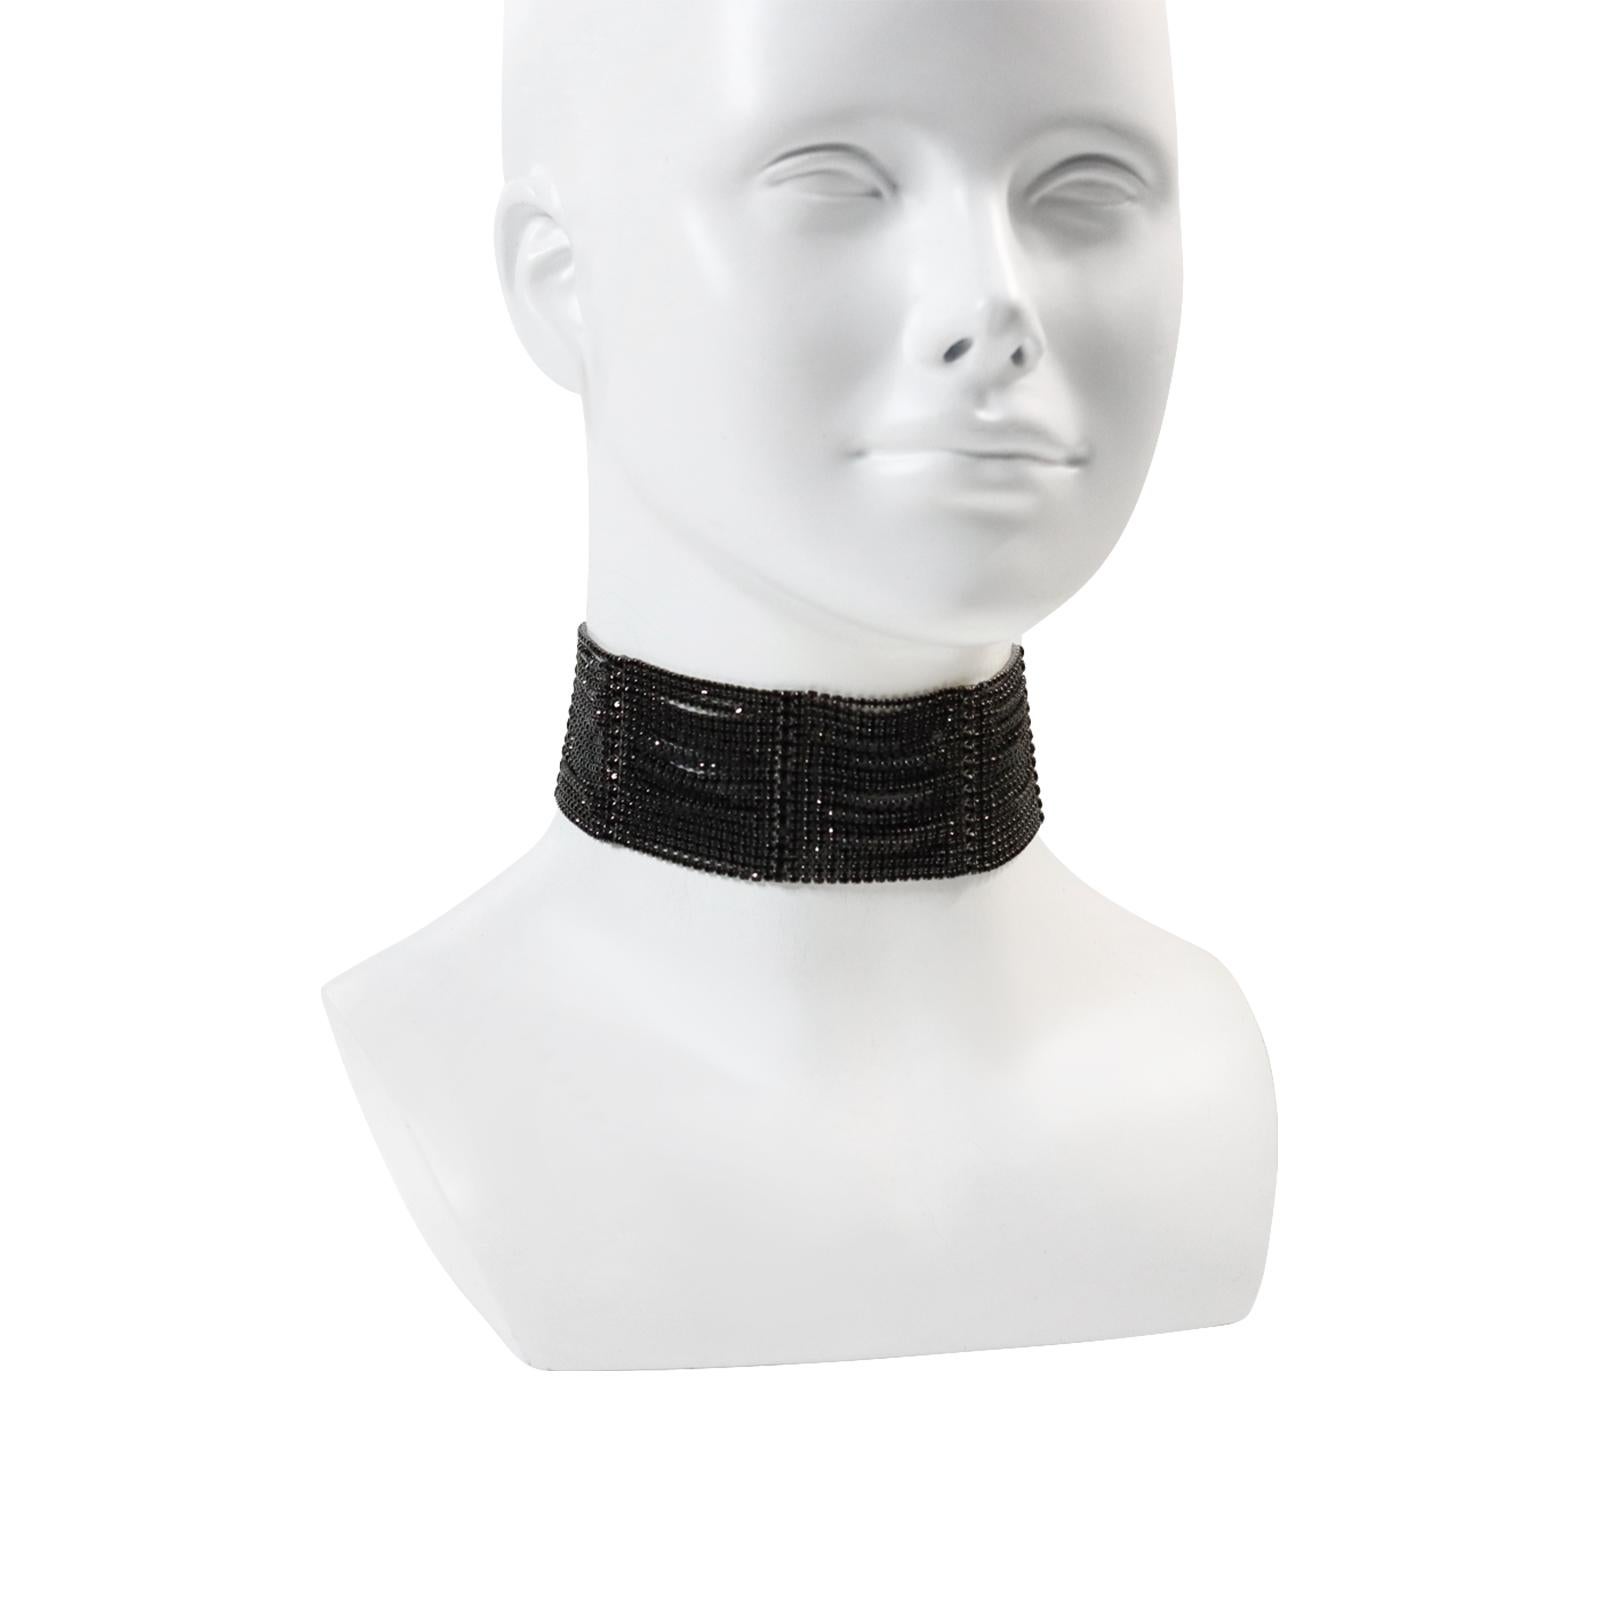 Vintage Butler and Wilson Black Diamante Wide Choker Circa 1990s.  Such a gorgeous piece that always looks on trend. This can look great for the day with a white shirt or with a ball gown. Looks amazing and comfortable to wear.

12.5